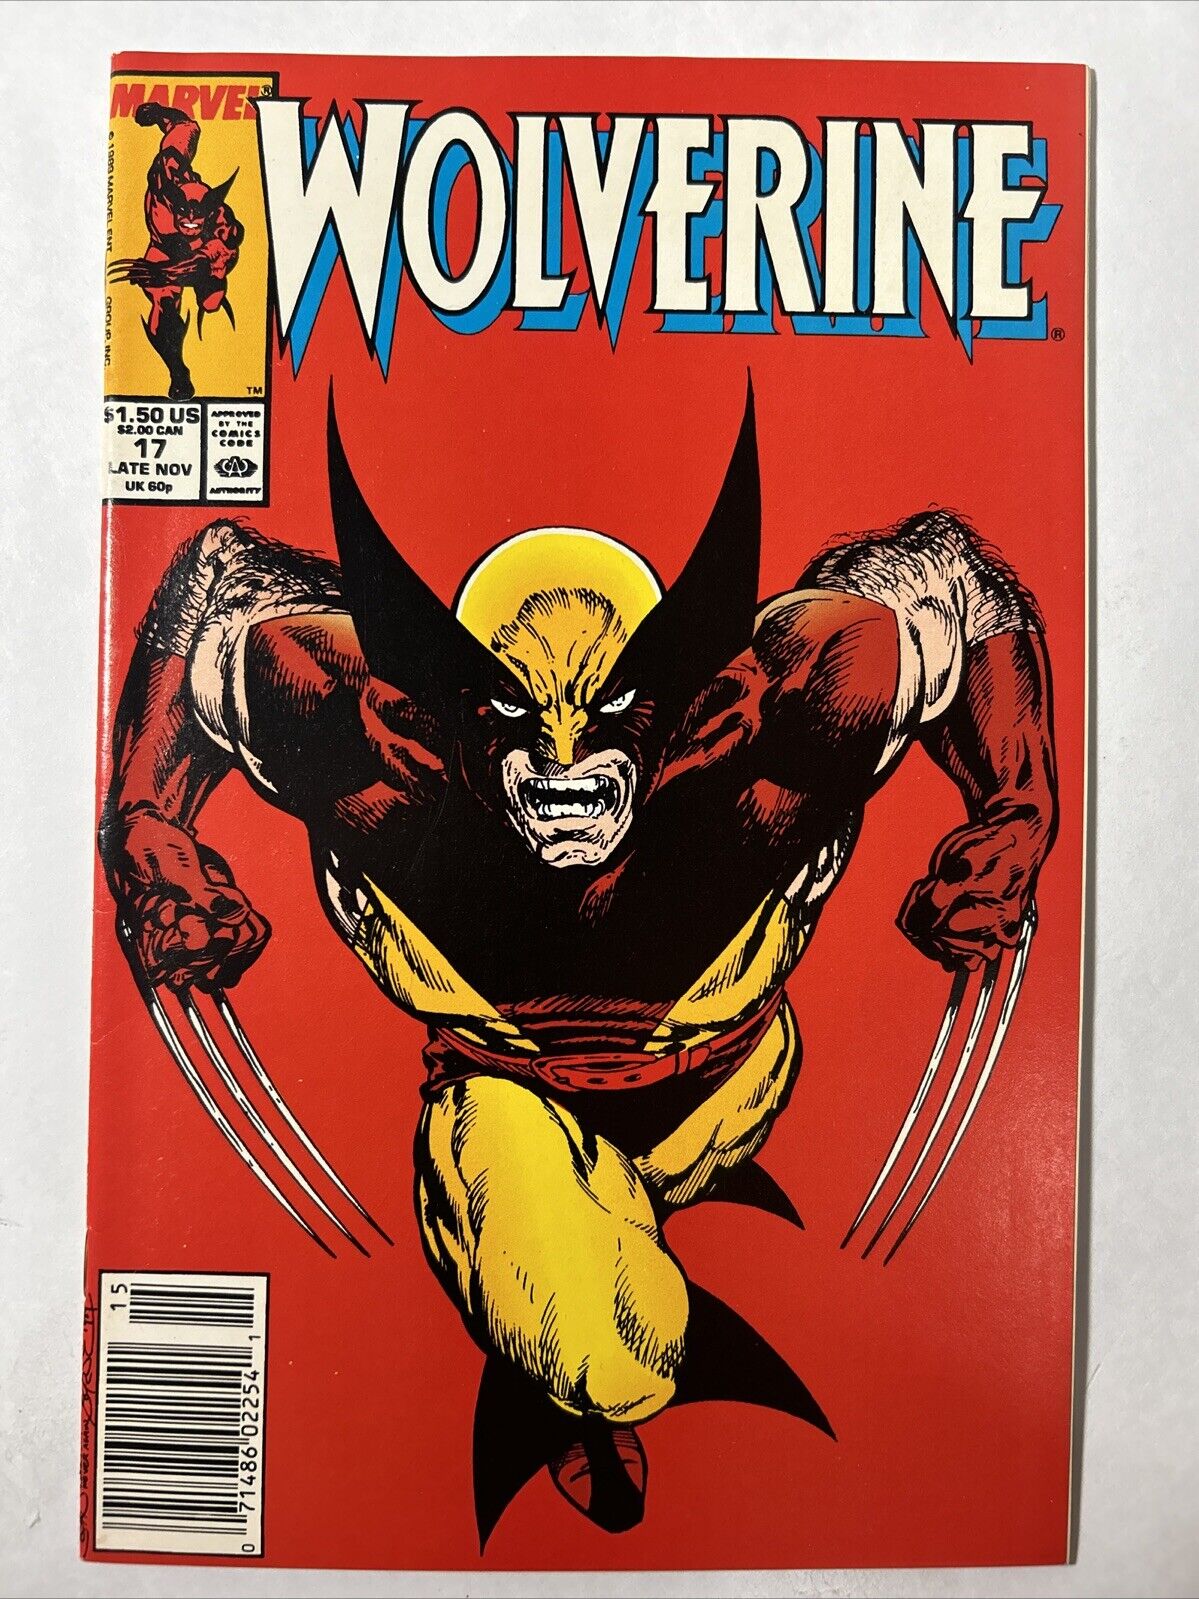 Wolverine #17 NEWSSTAND Variant 1989 Marvel Comics Byrne Classic Cover MCU